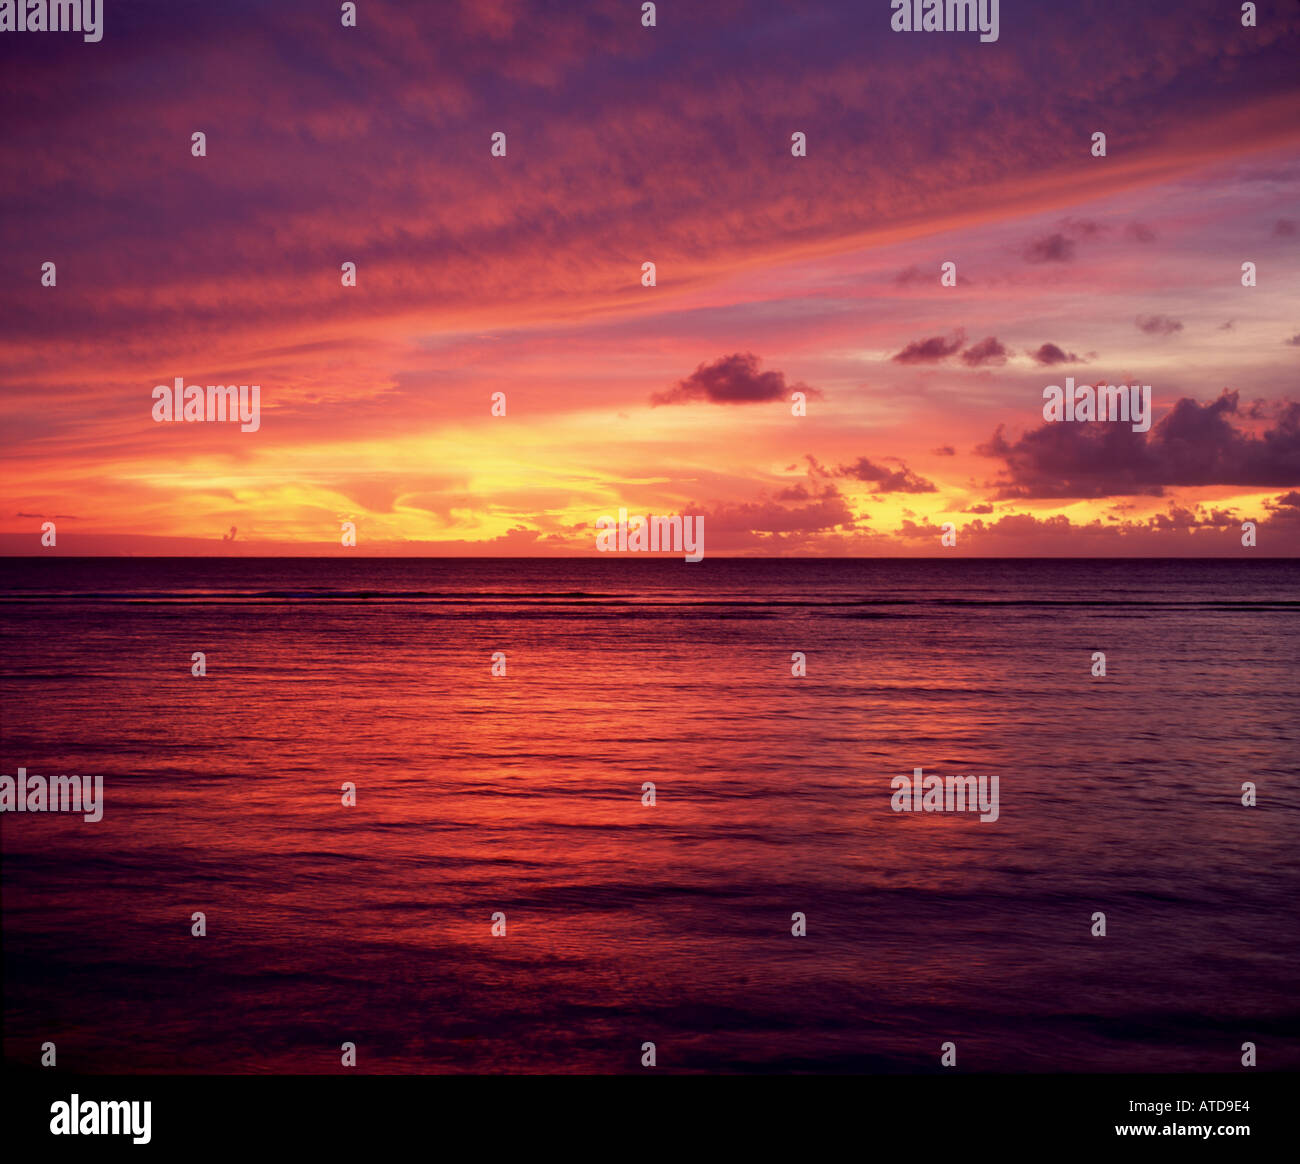 View of a dramatic and colorful sunset over the ocean from the Caribbean island of Tobago Stock Photo